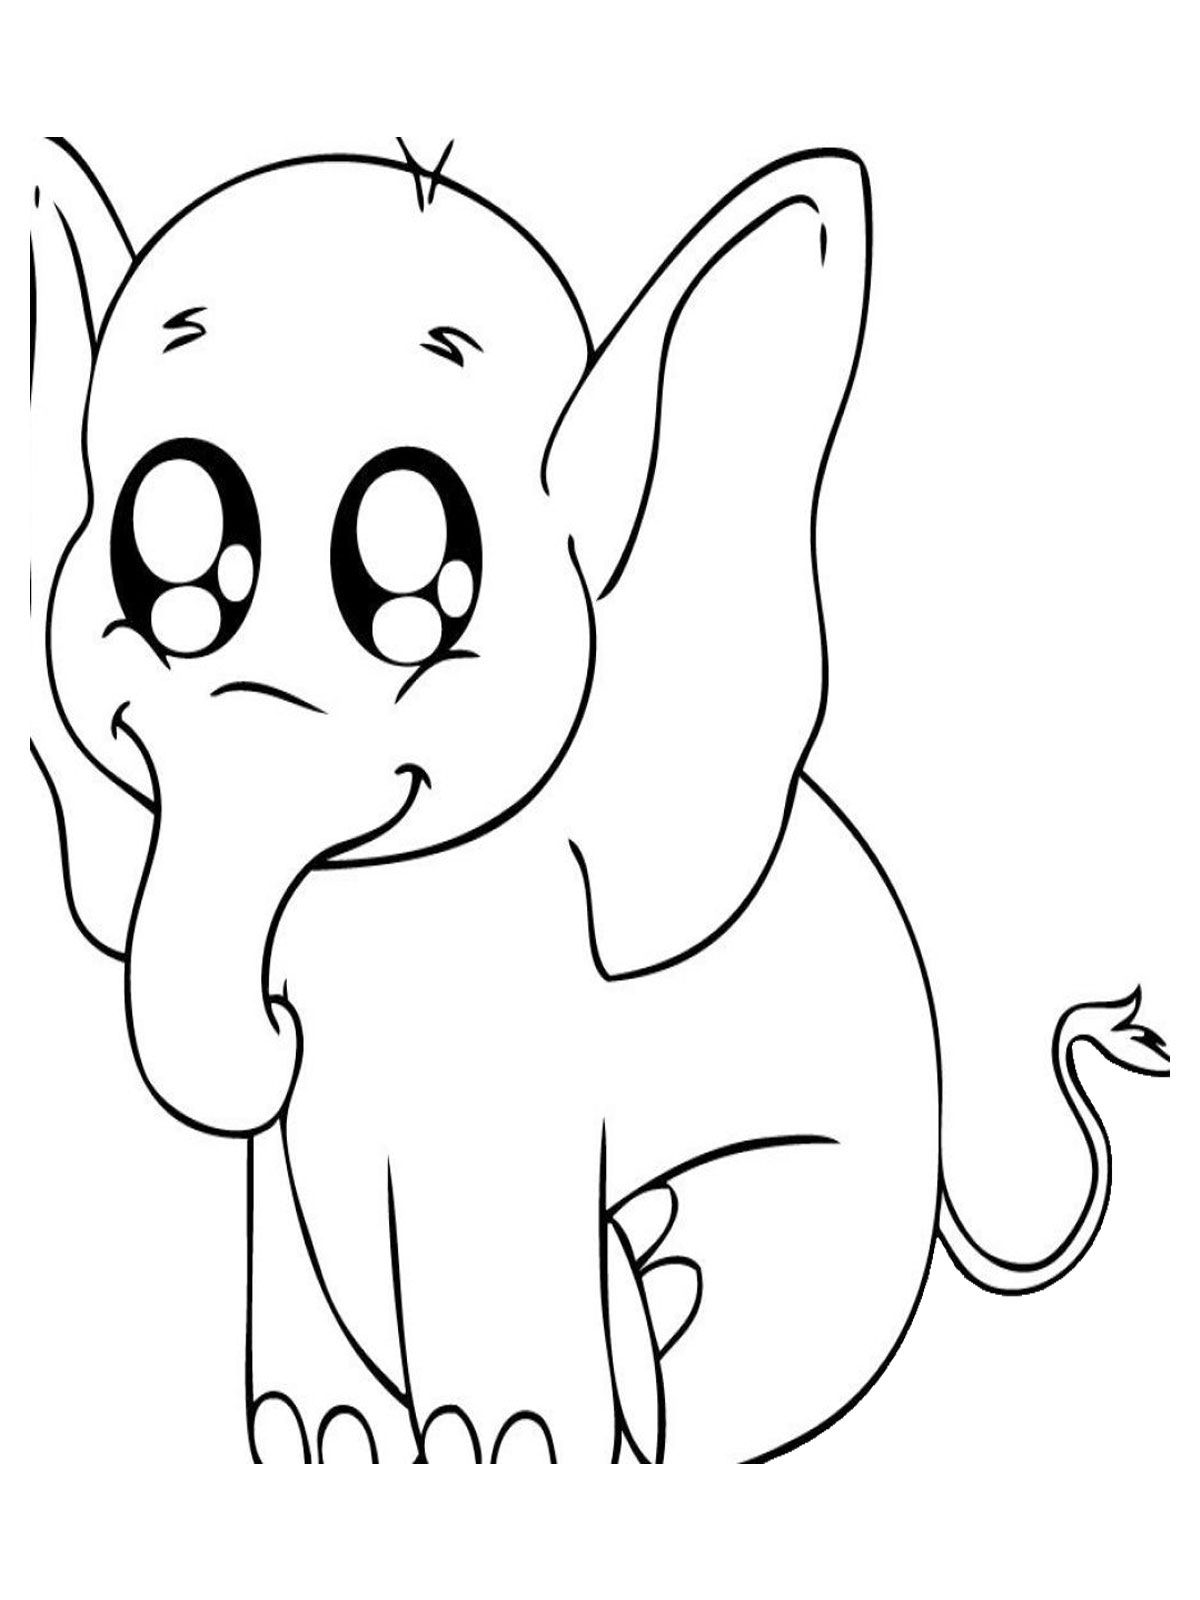 Baby Animal Coloring Pages Realistic Coloring Pages. Cute Baby